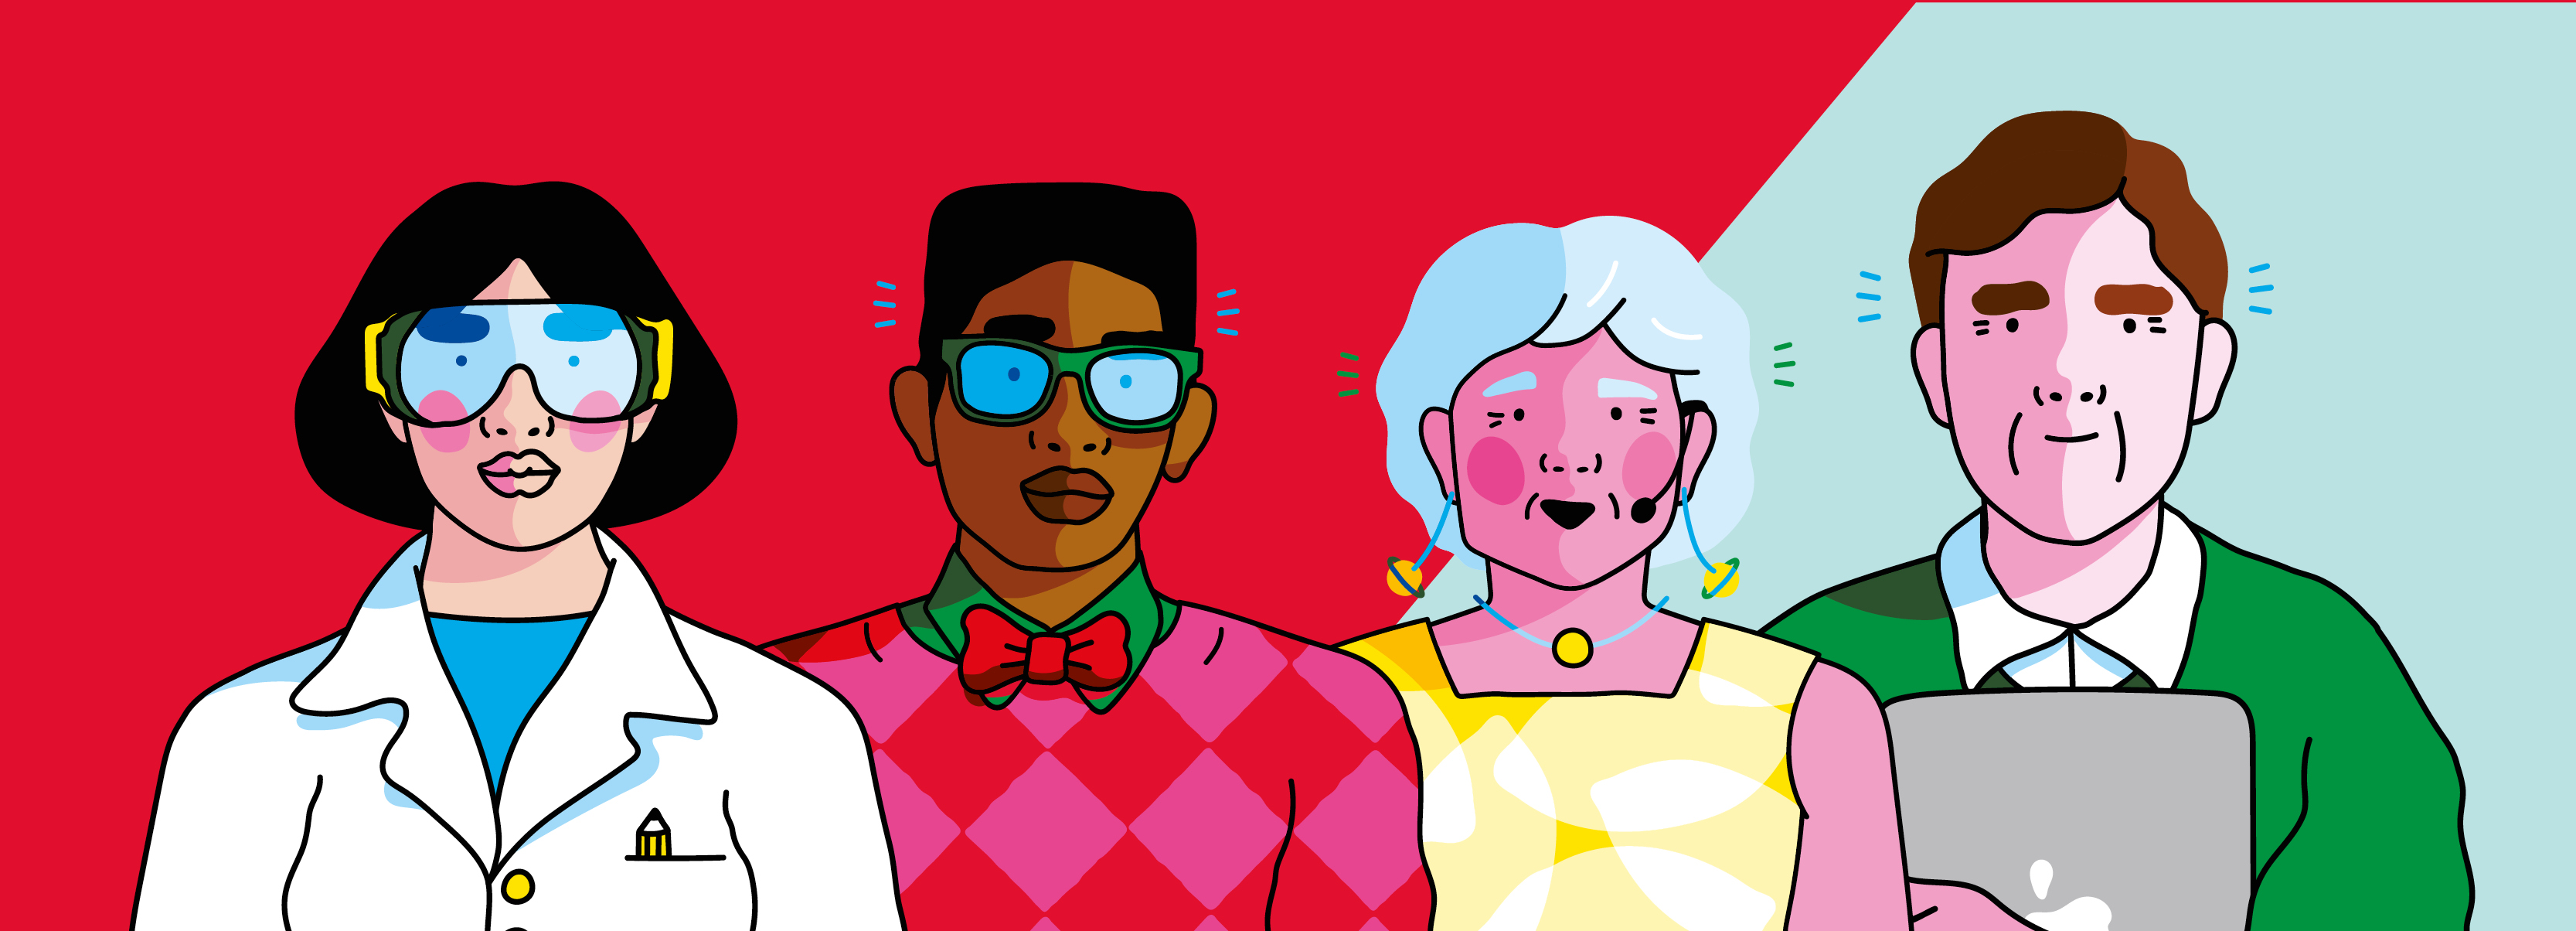 Illustration of four researchers in front of a red and blue background